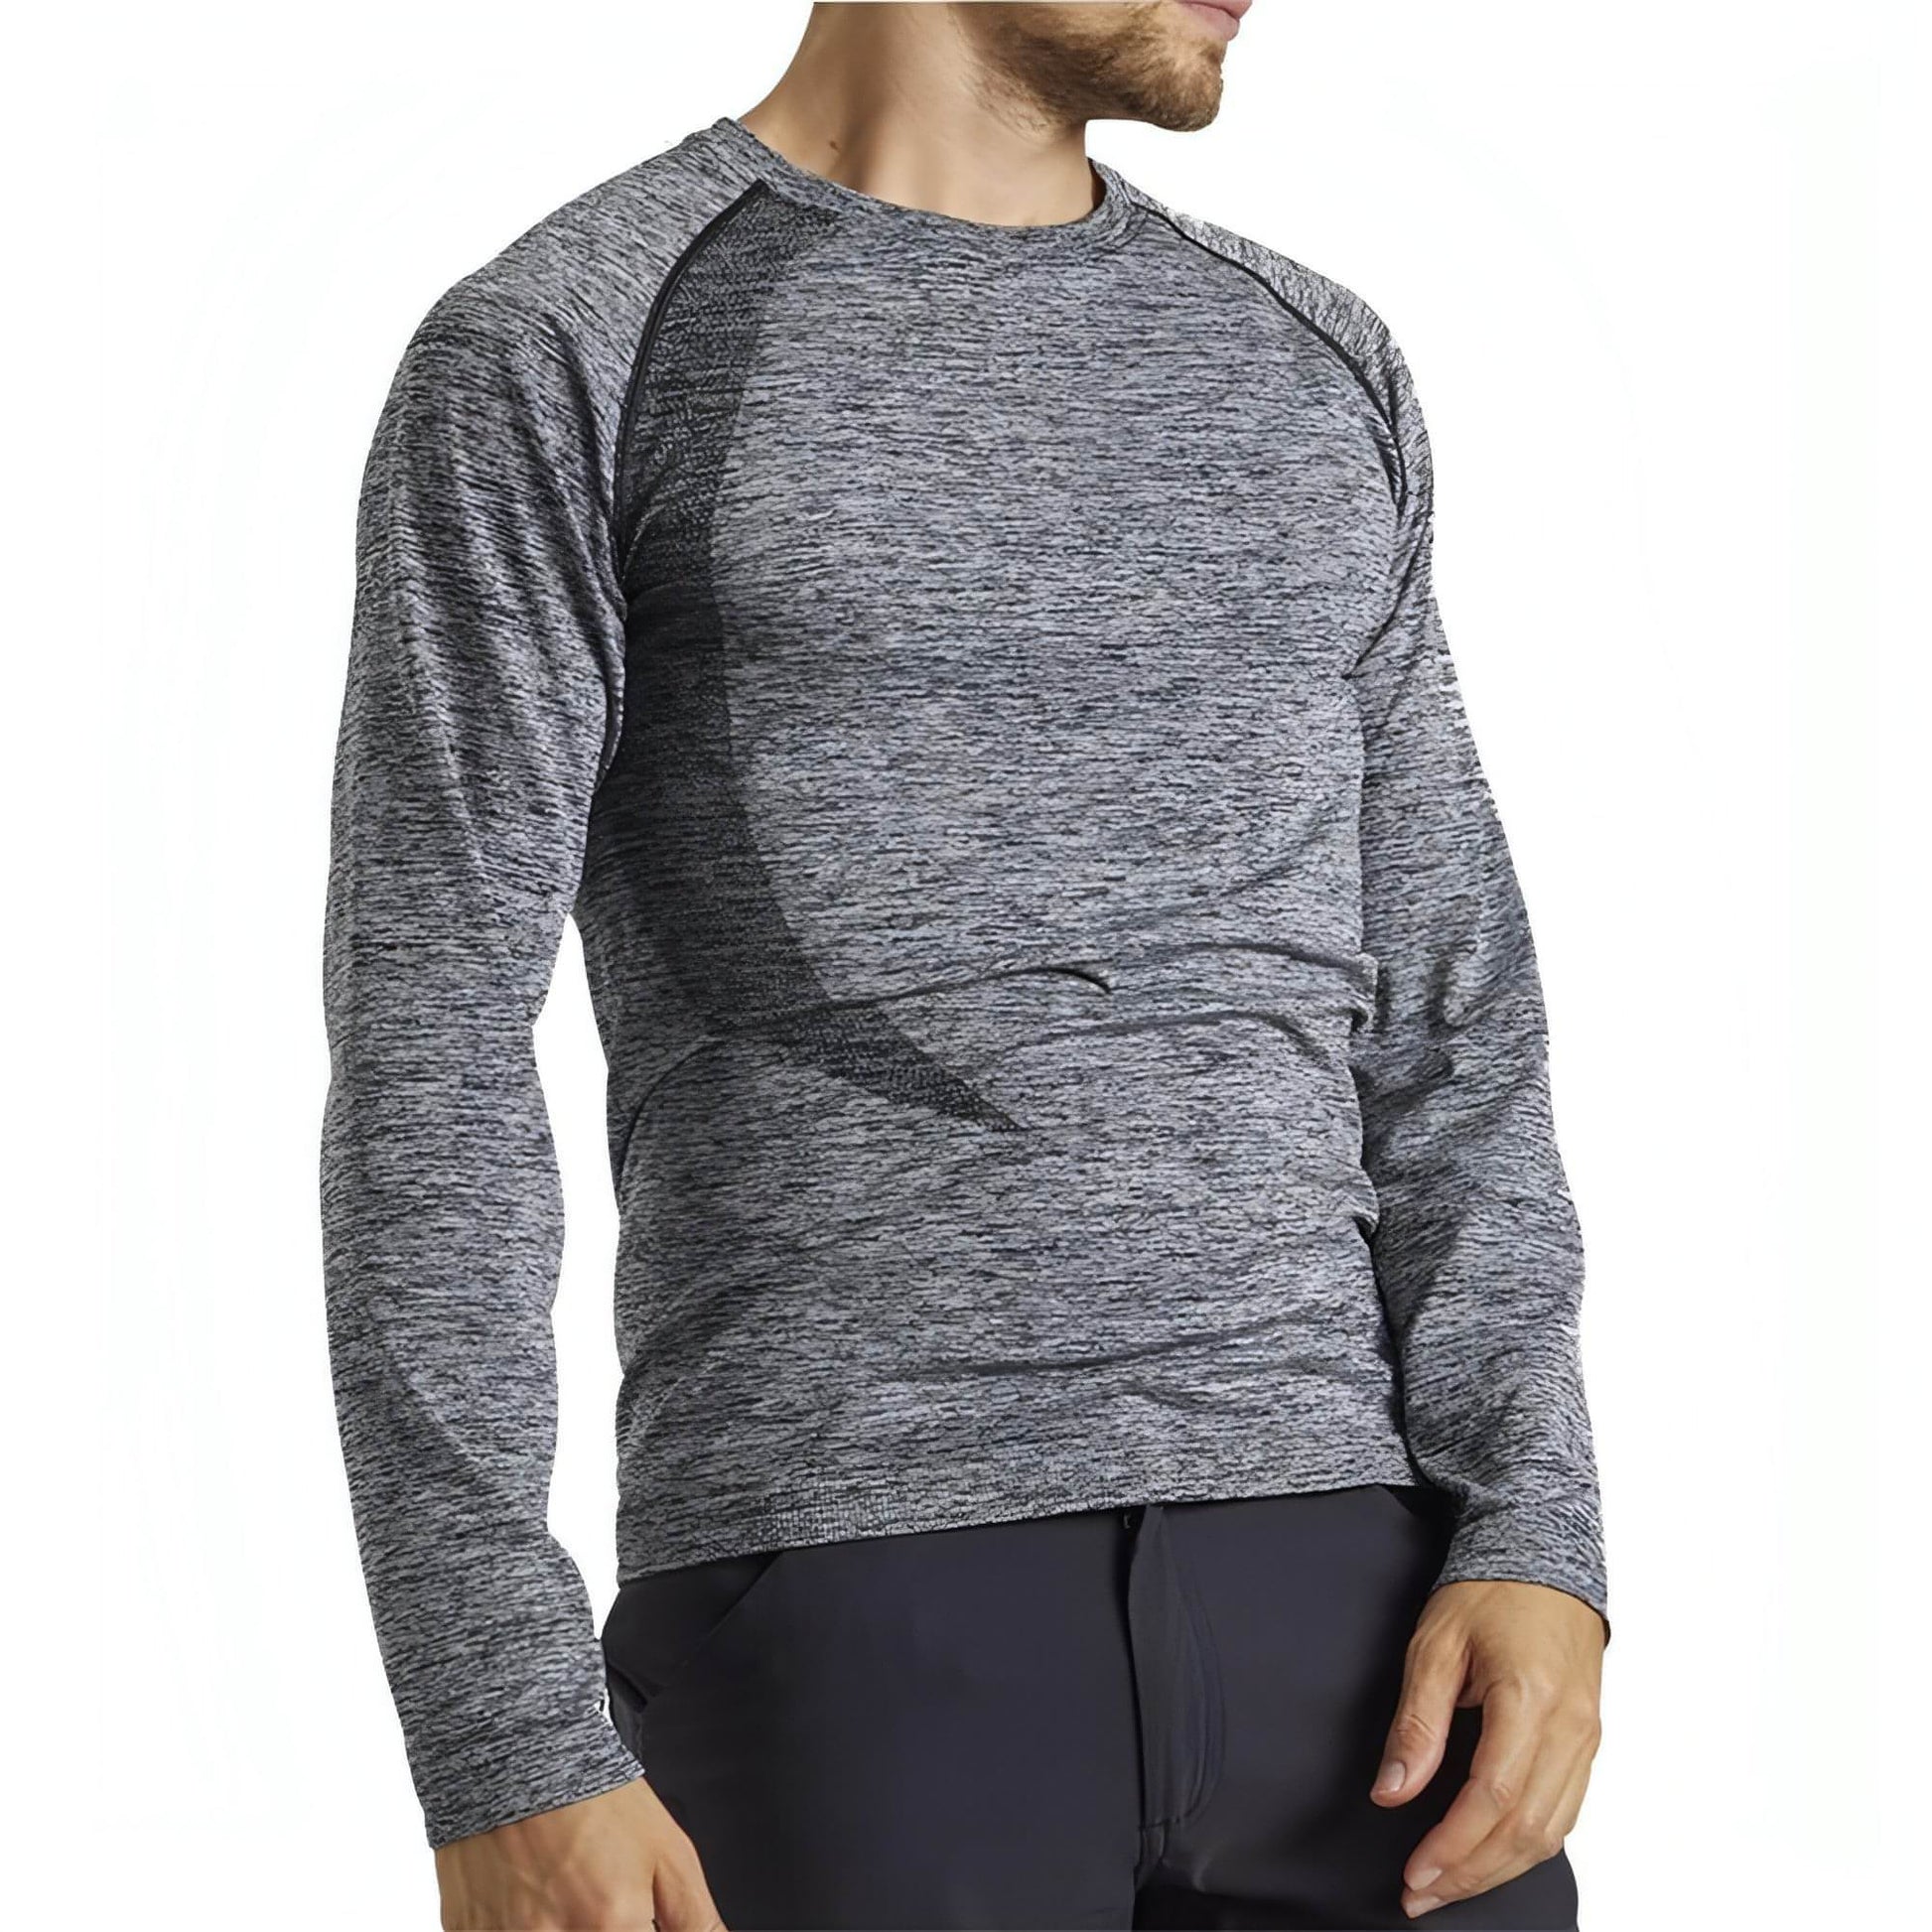 Ohmme Orion Long Sleeve Mens Yoga Top - Grey - Start Fitness